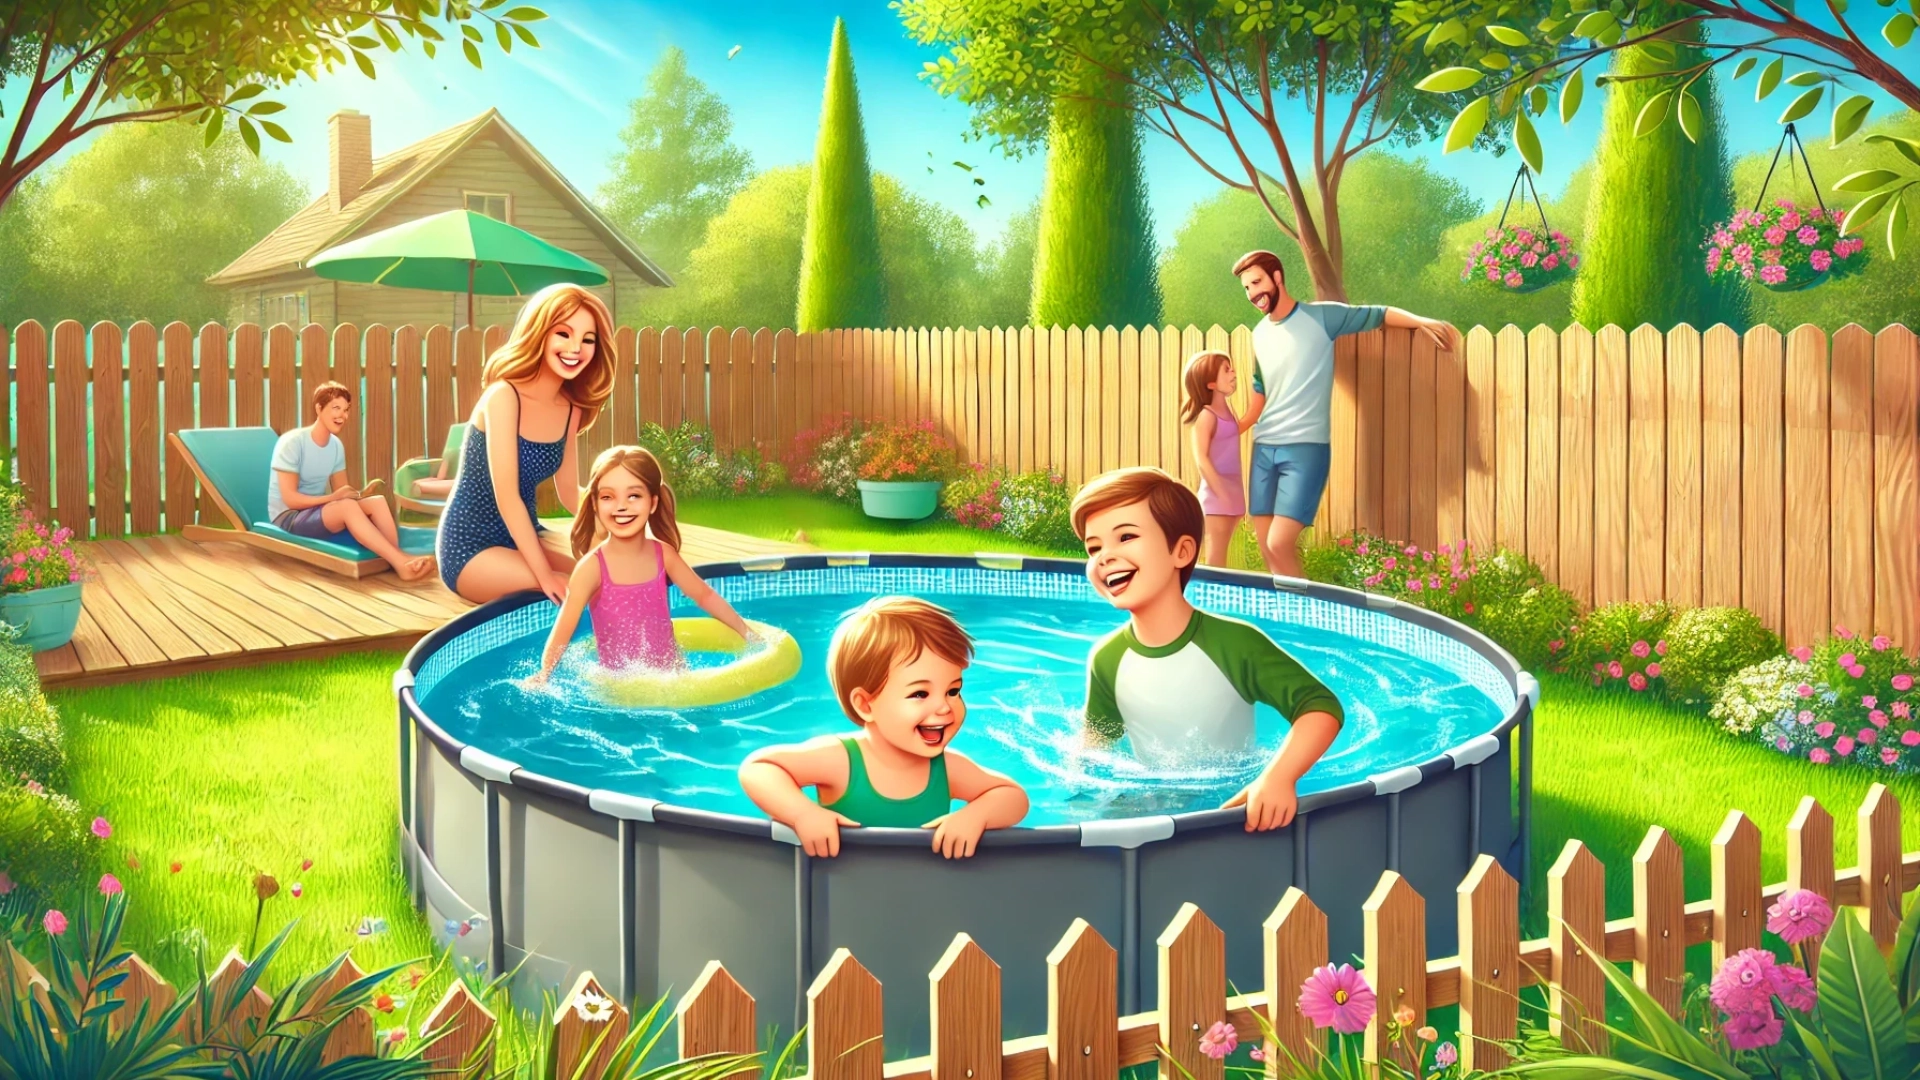 A family enjoying their above-ground pool in their fenced backyard on a bright, sunny day.